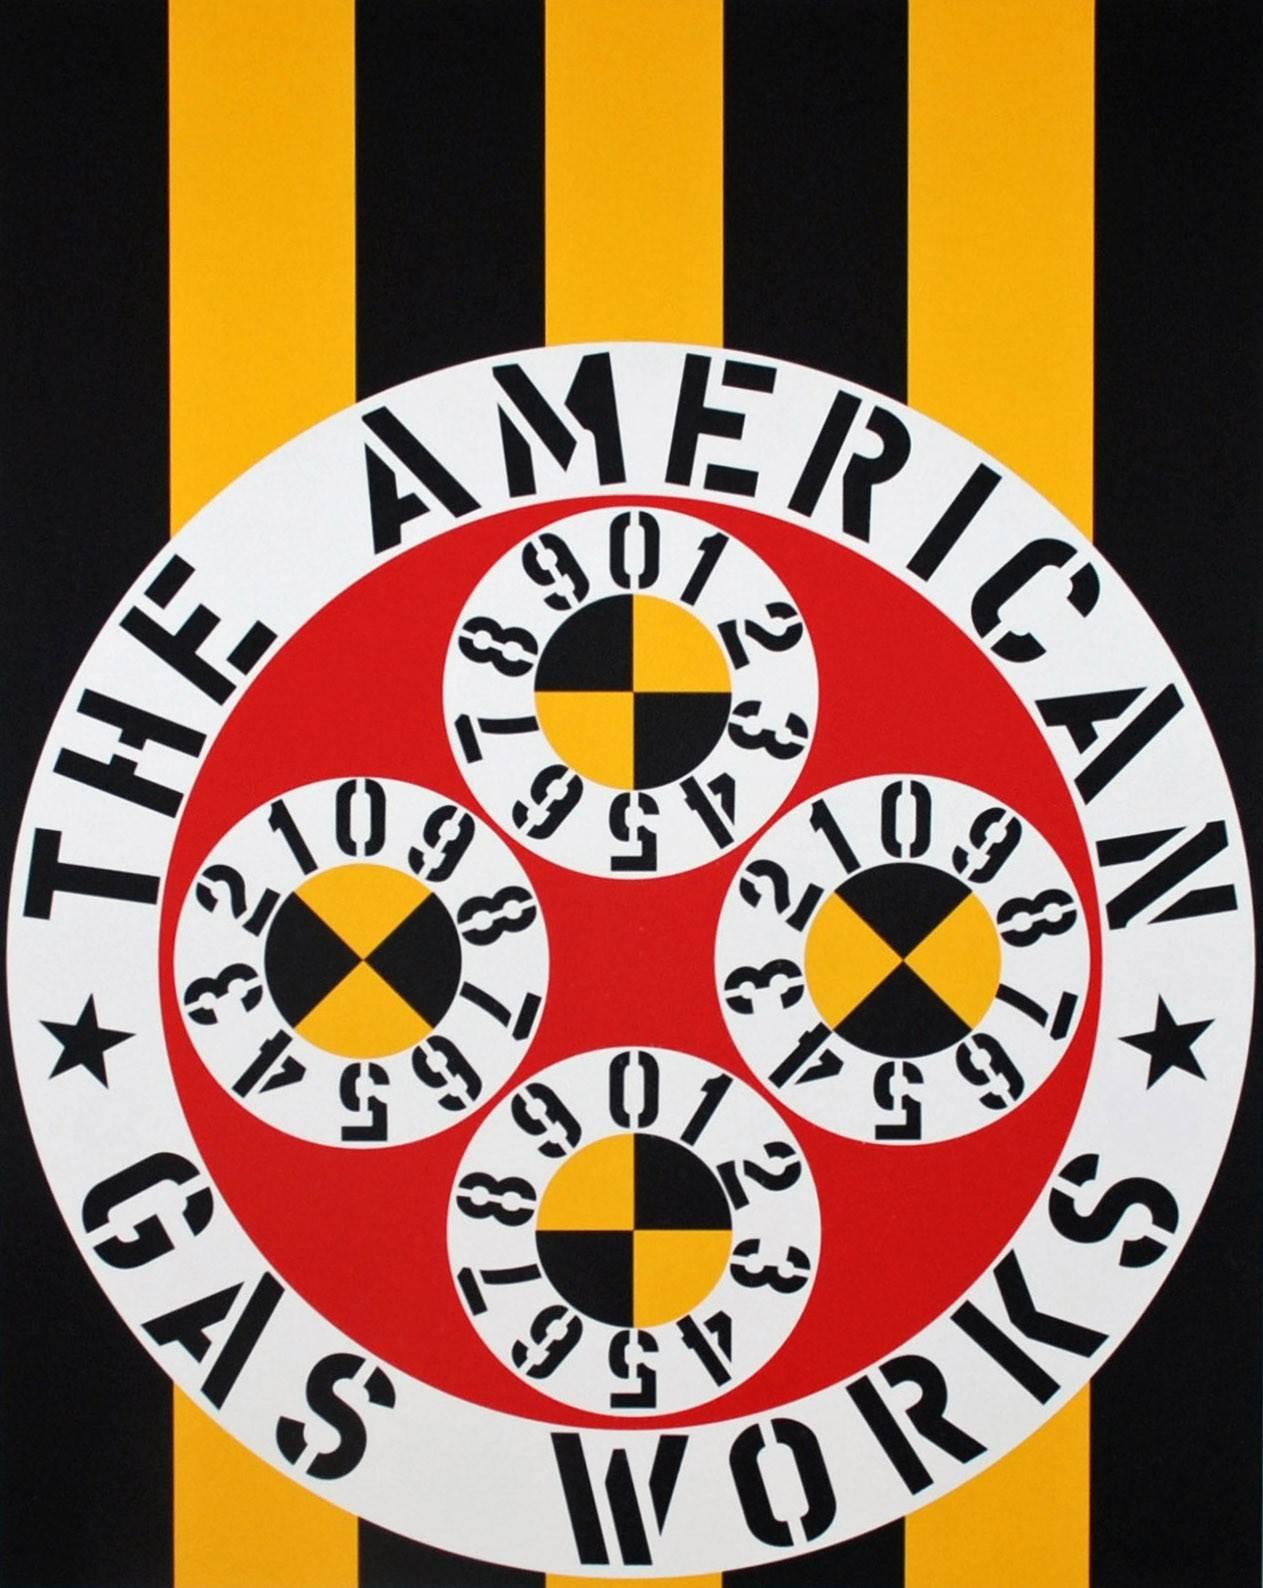 The American Gas Works - Print by Robert Indiana